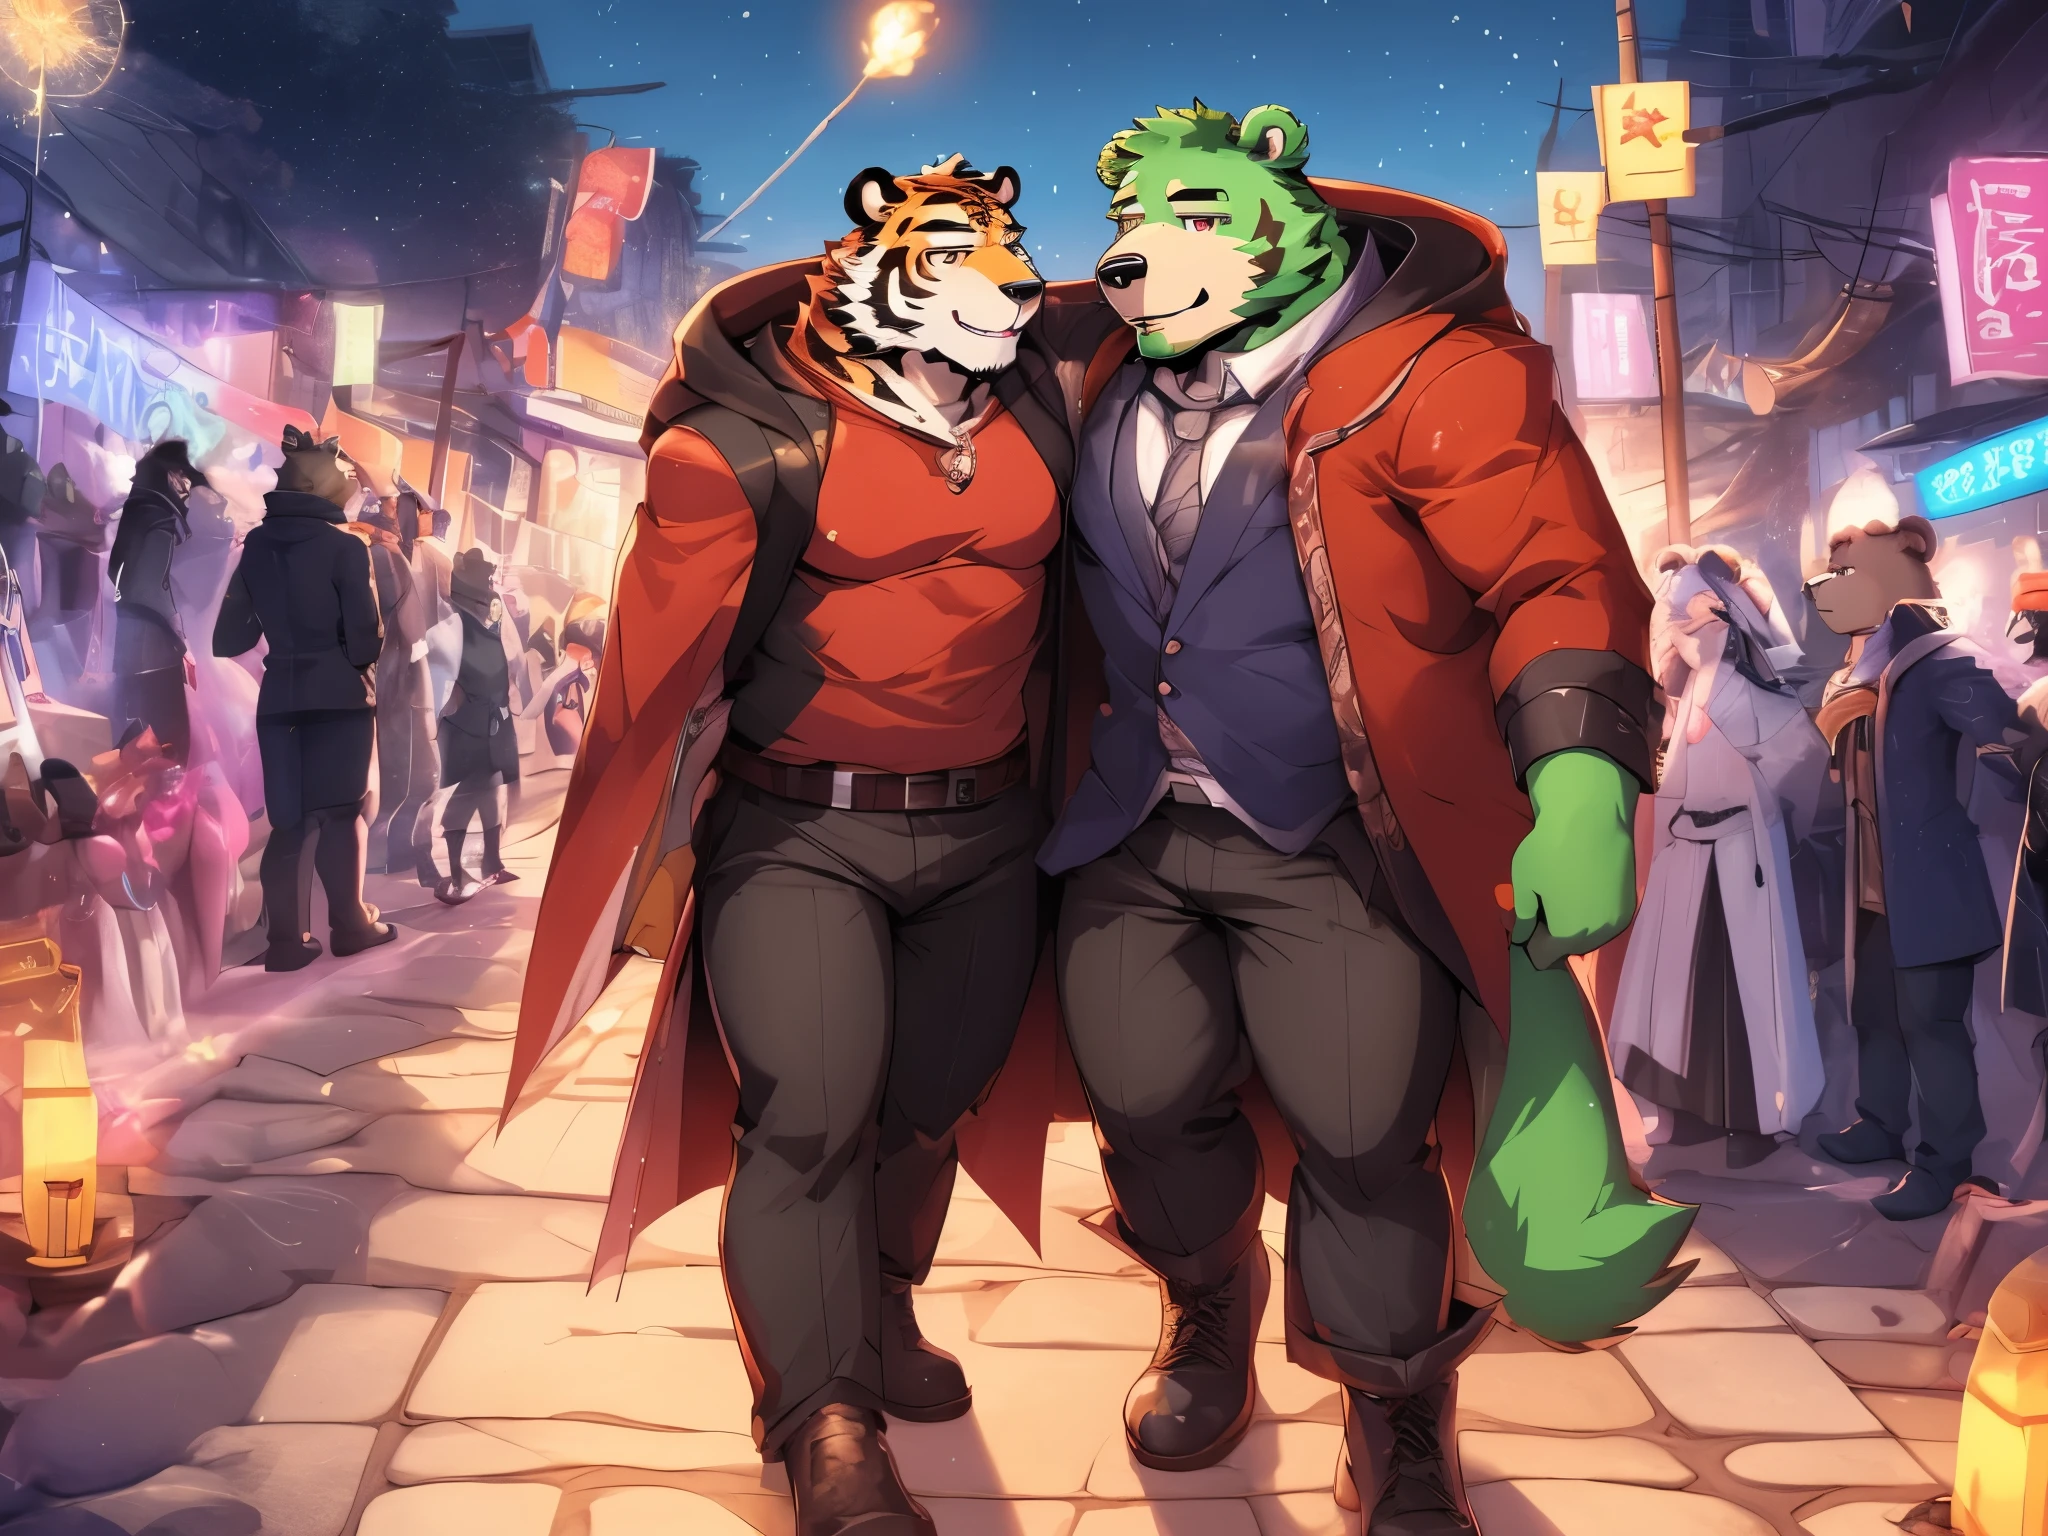 2boy, anthro ((tiger)) with anthro ((bear)), ((kosutora)) going out with ((jinpei)), casual clothes, kissing under fireworks, crowded street, winter, happy new year scenery,